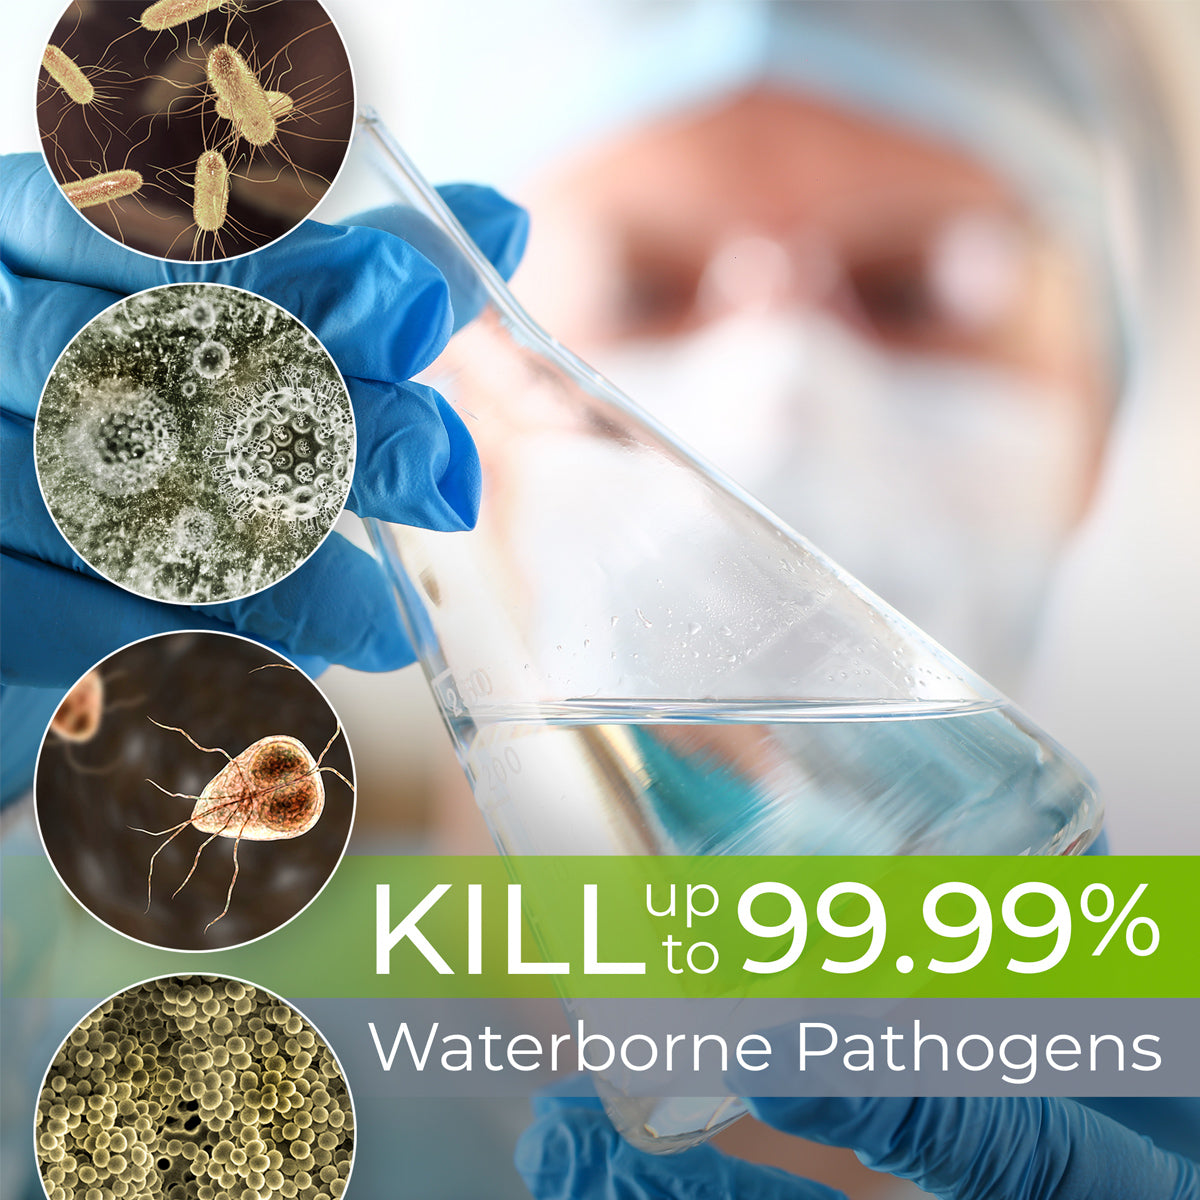 Kill up to 99.99% of waterborne pathogens